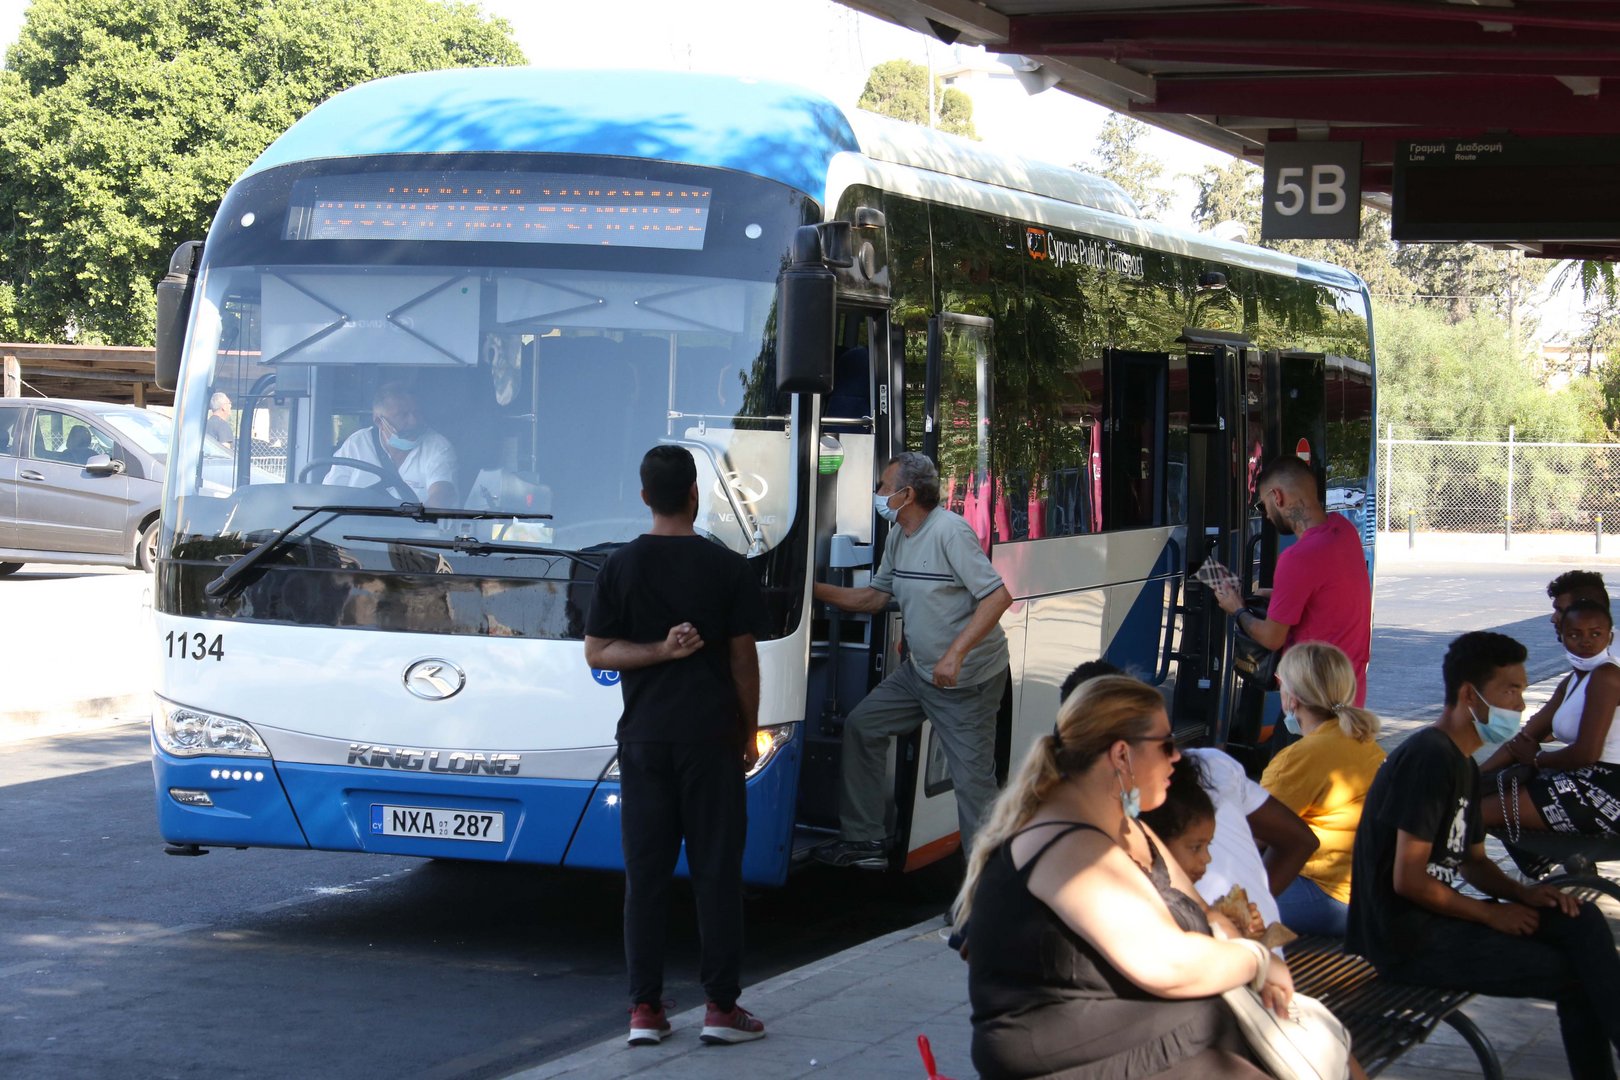 image Our View: More action needed if people are to take the bus